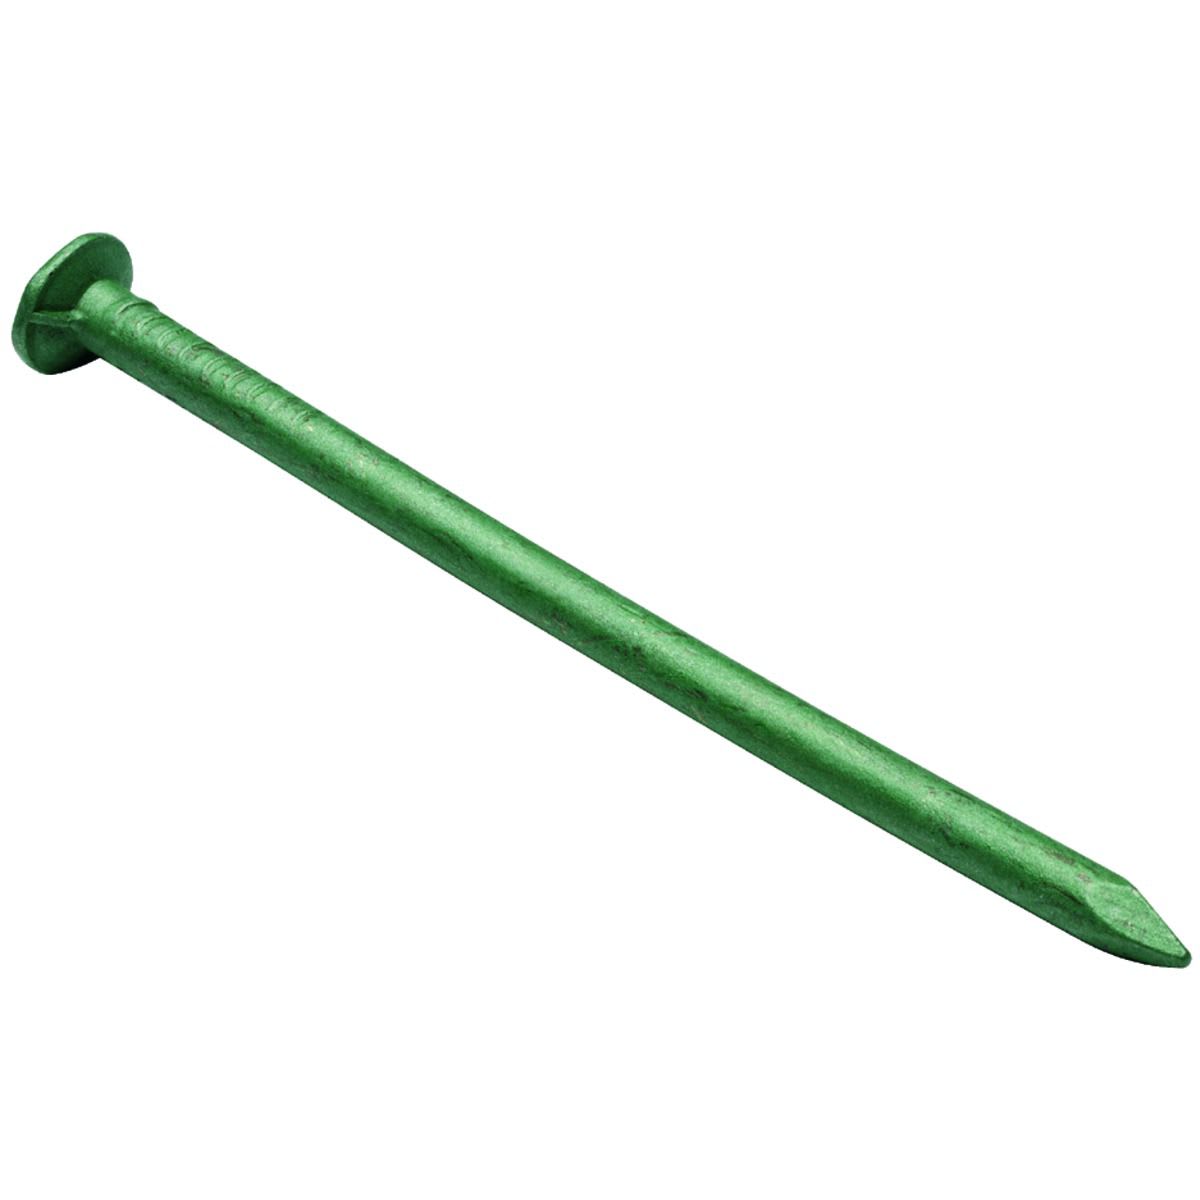 Wickes 75mm Exterior Nails - 250g